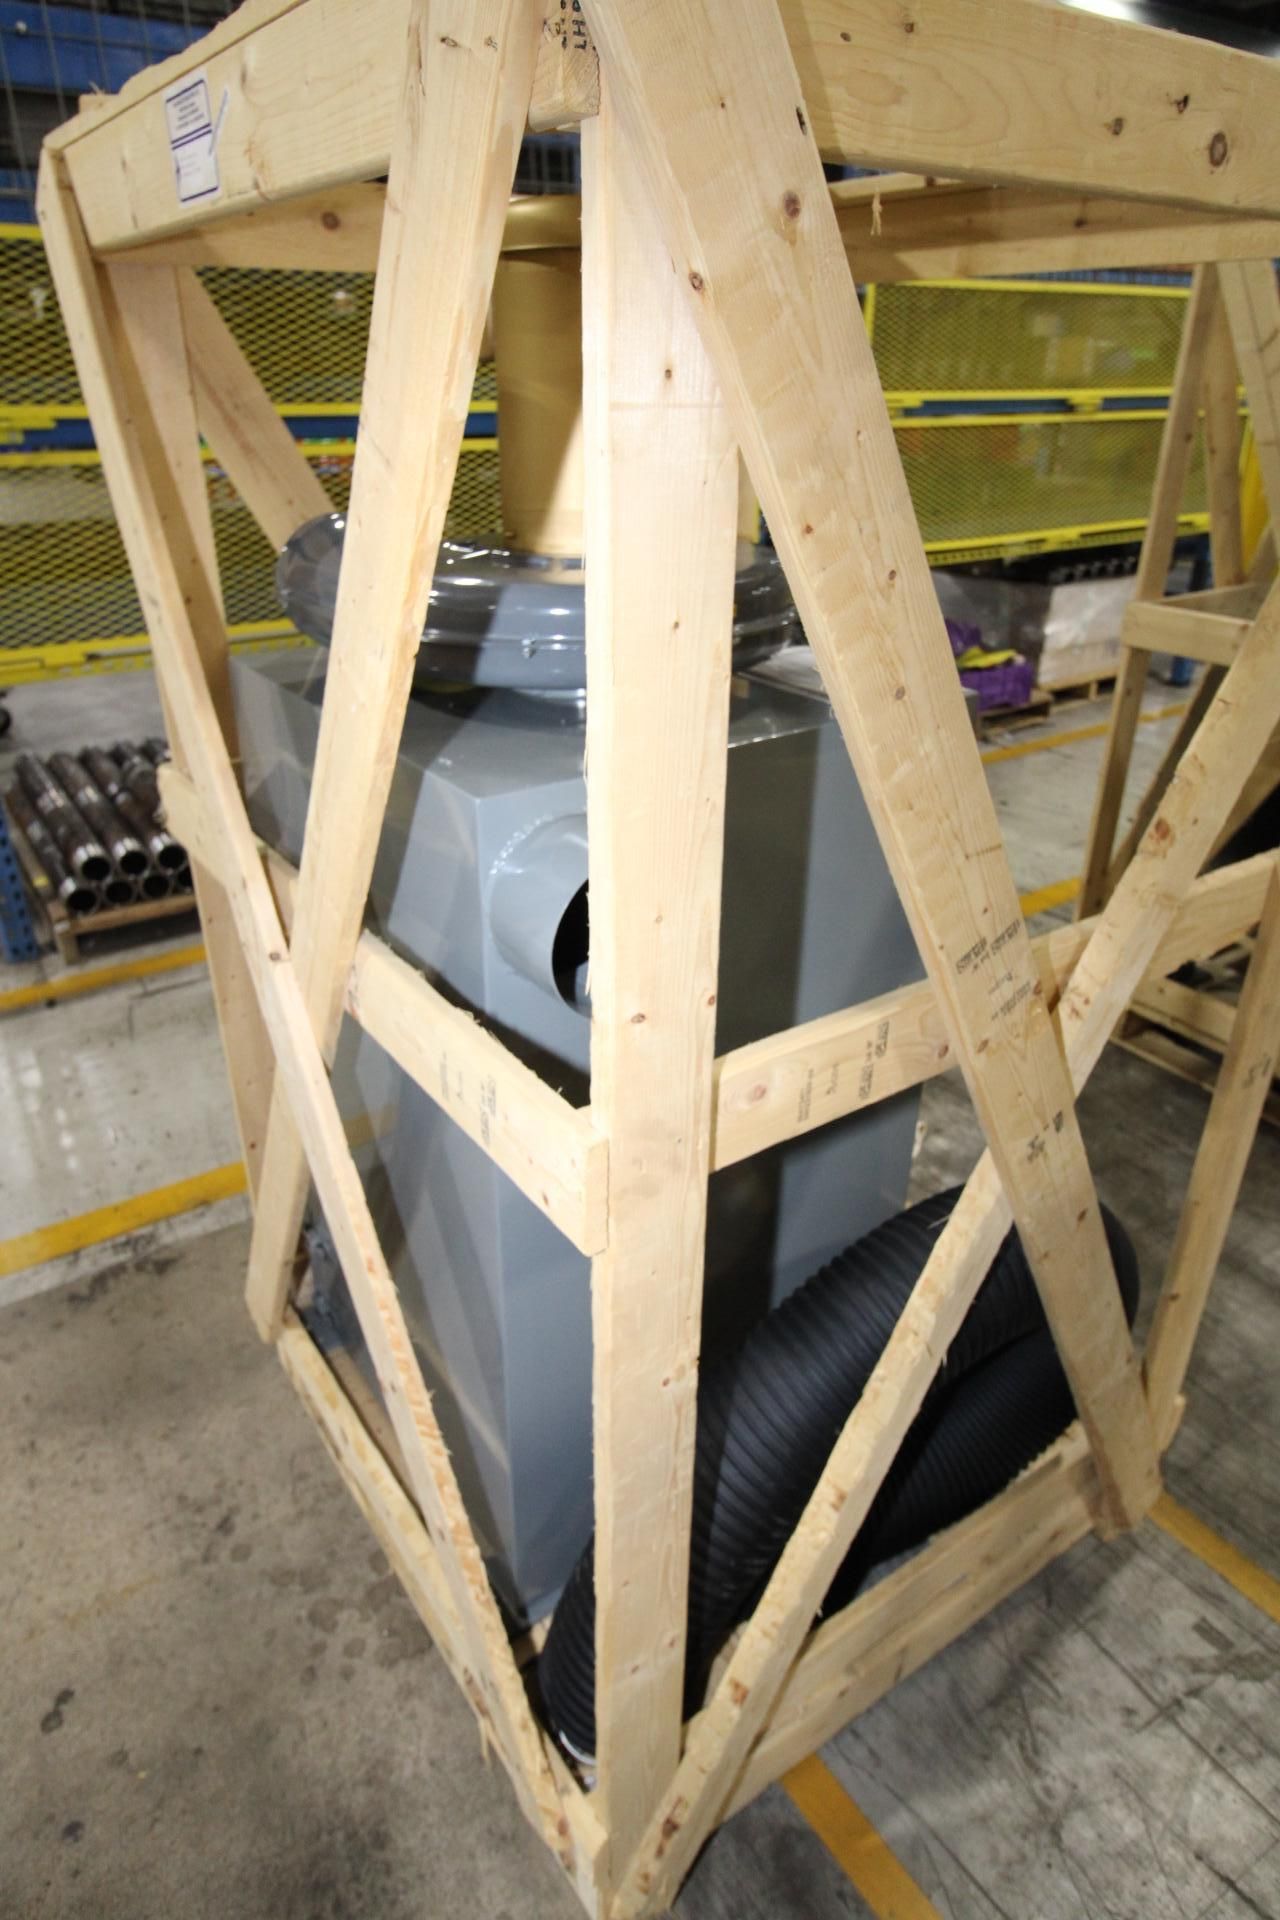 INDUSTRIAL SANDER W/ DUST COLLECTOR, KALAMAZOO S8D, 8” x 60”, 7.5 HP, w/ dust collection system, - Image 8 of 8